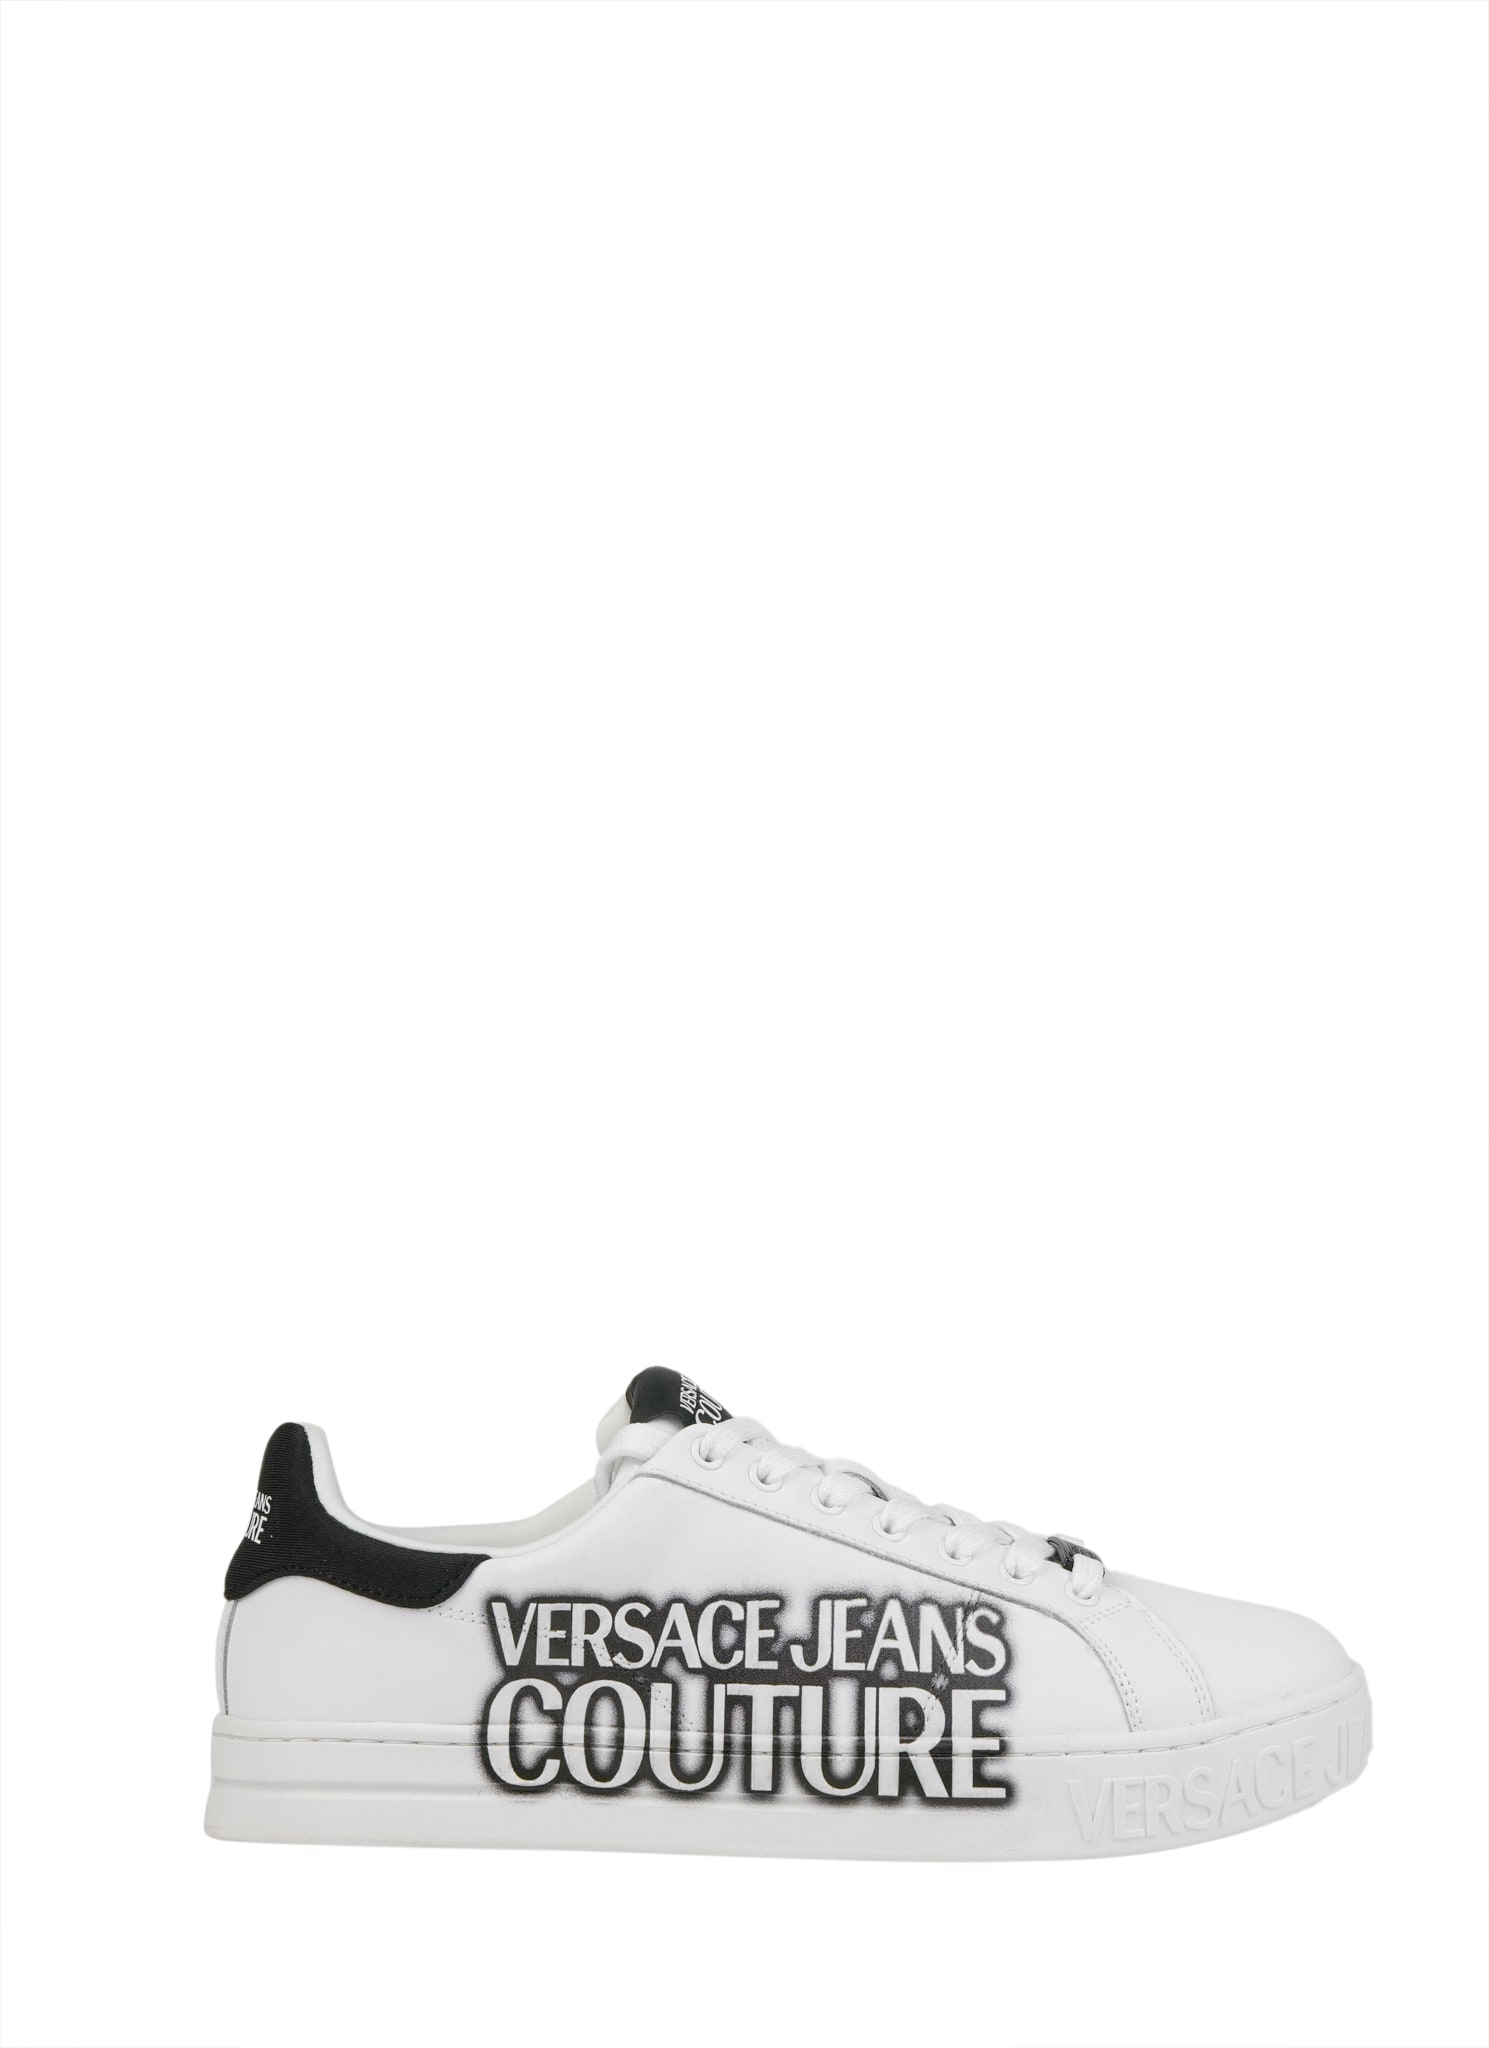 Versace Jeans Couture Fondo Court Sneaker